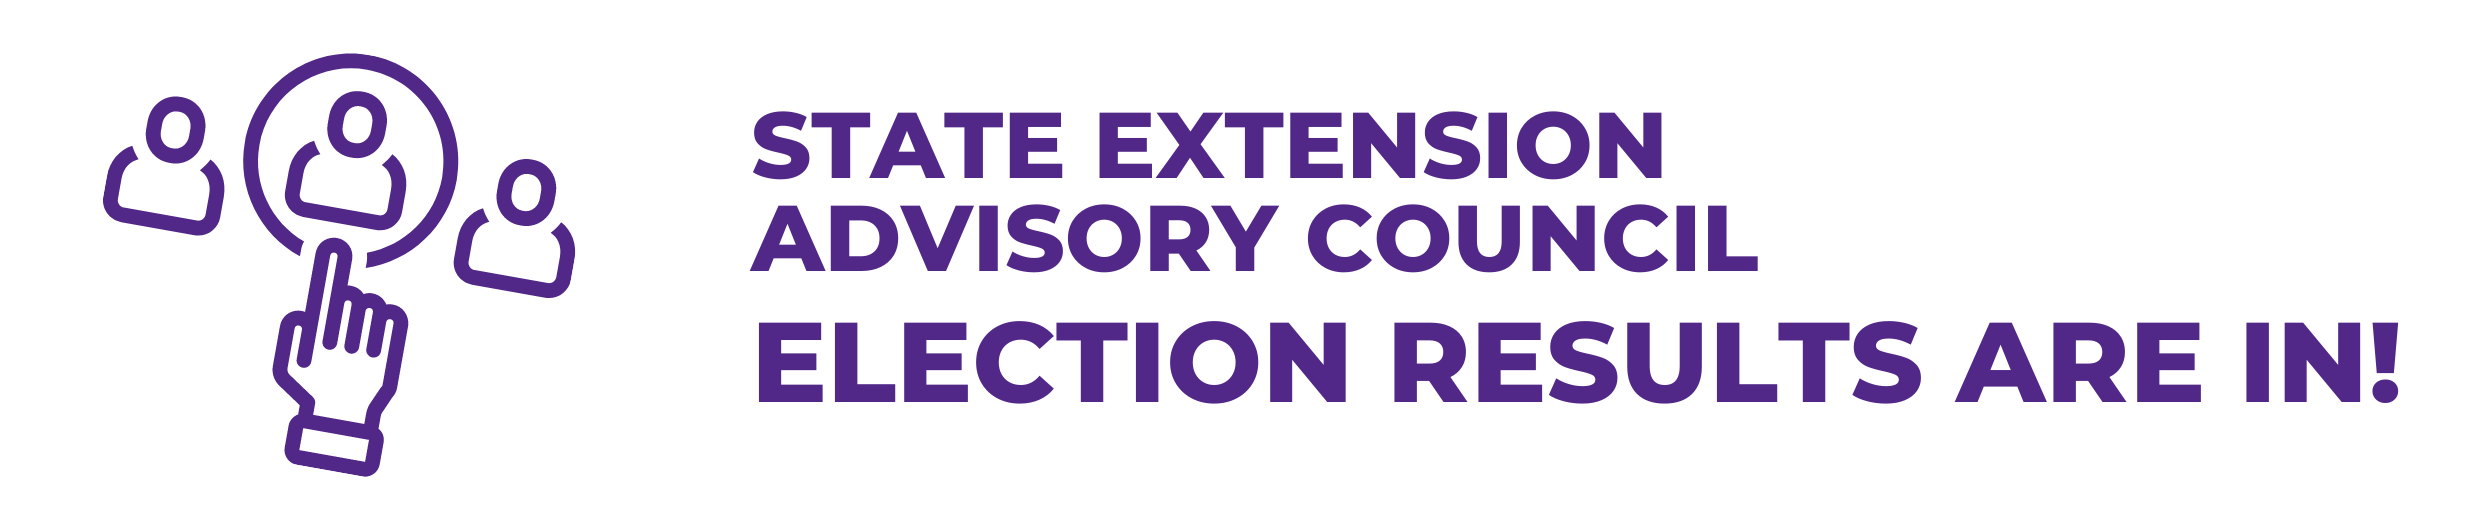 State Extension Advisory Council Election Results are in.